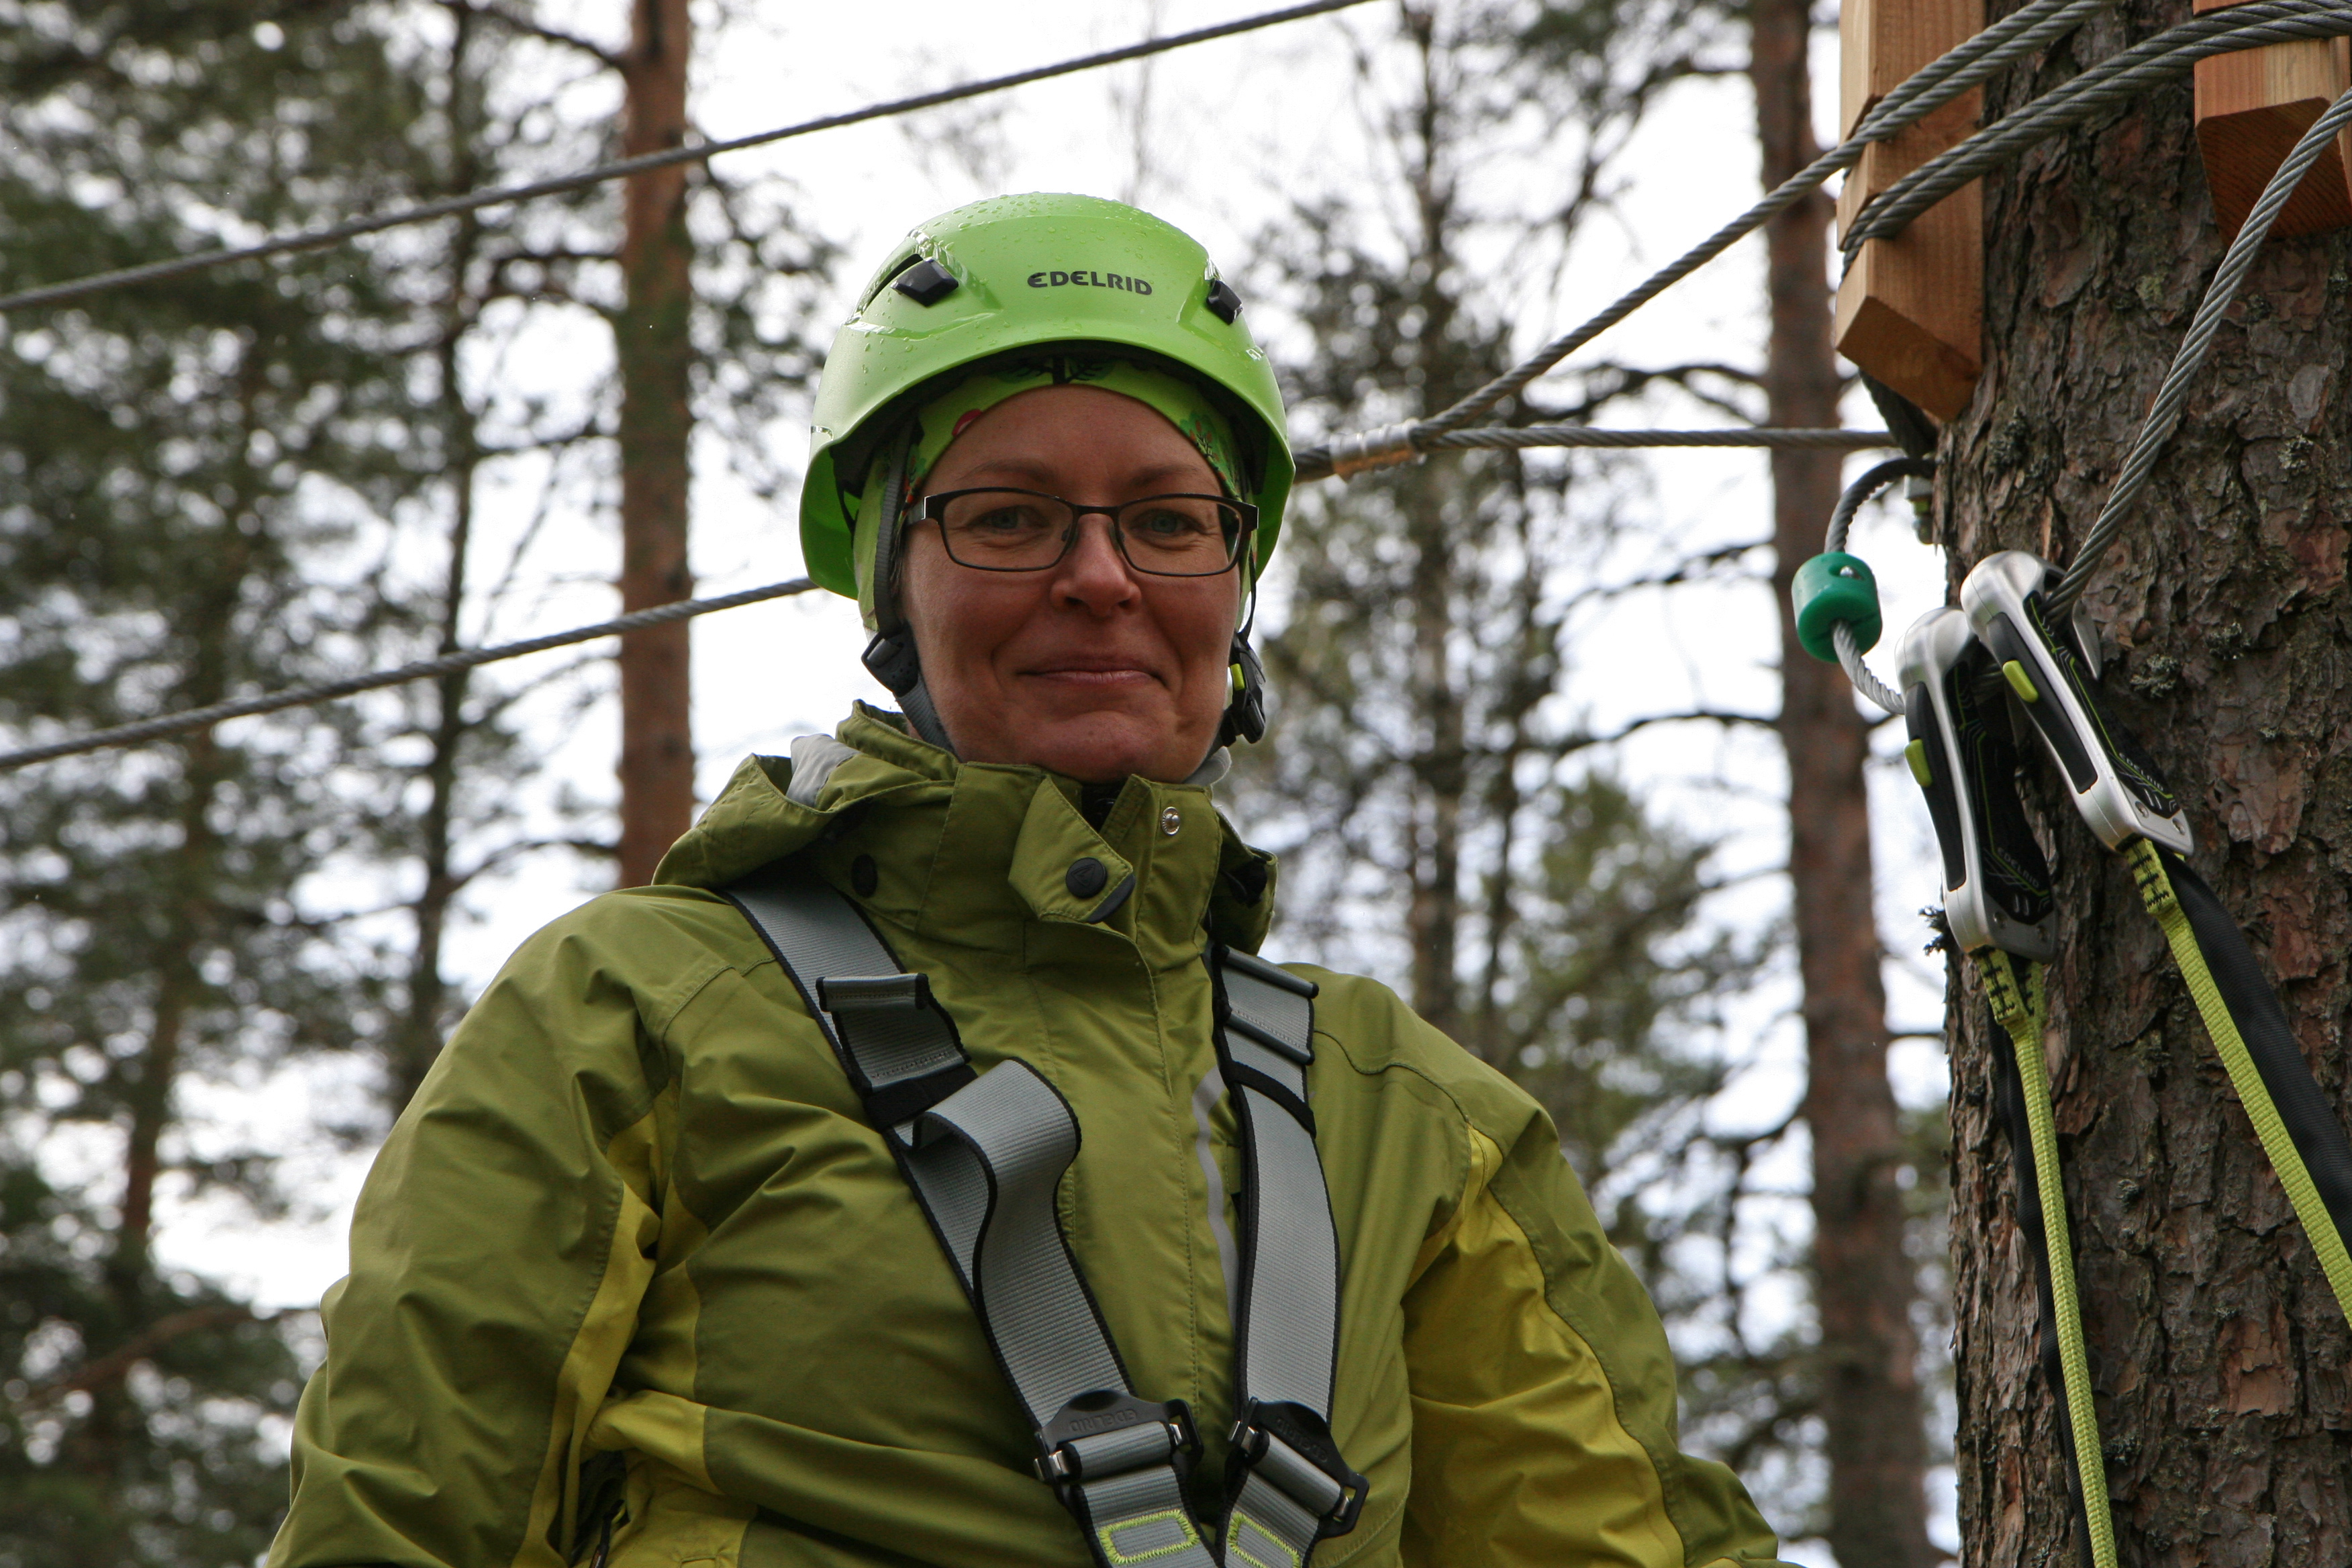 Anne Oksanen hopes that the adventure park will attract more nature-based tourism services to Hyvinkää. Photo: Anna Kauppi